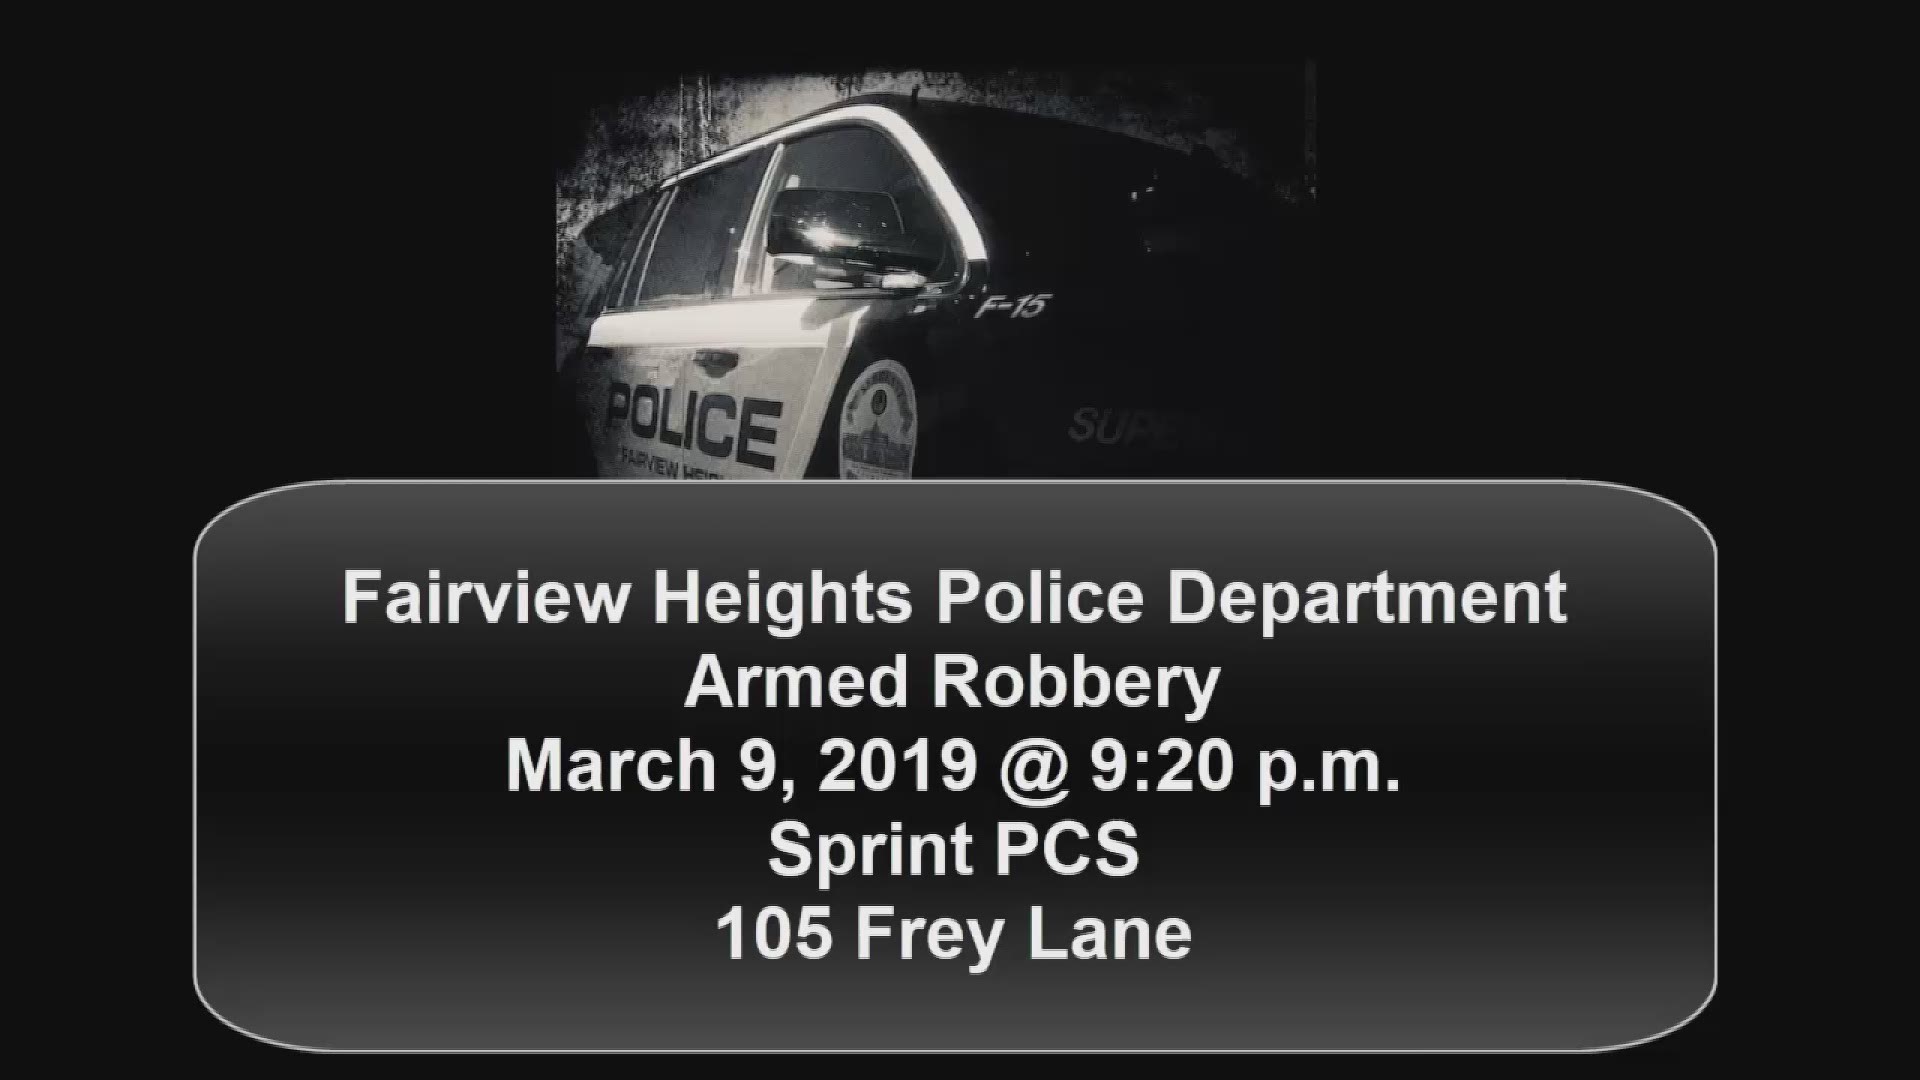 Three men are wanted for robbing a Sprint PCS store at gunpoint in Fairview Heights, Illinois.